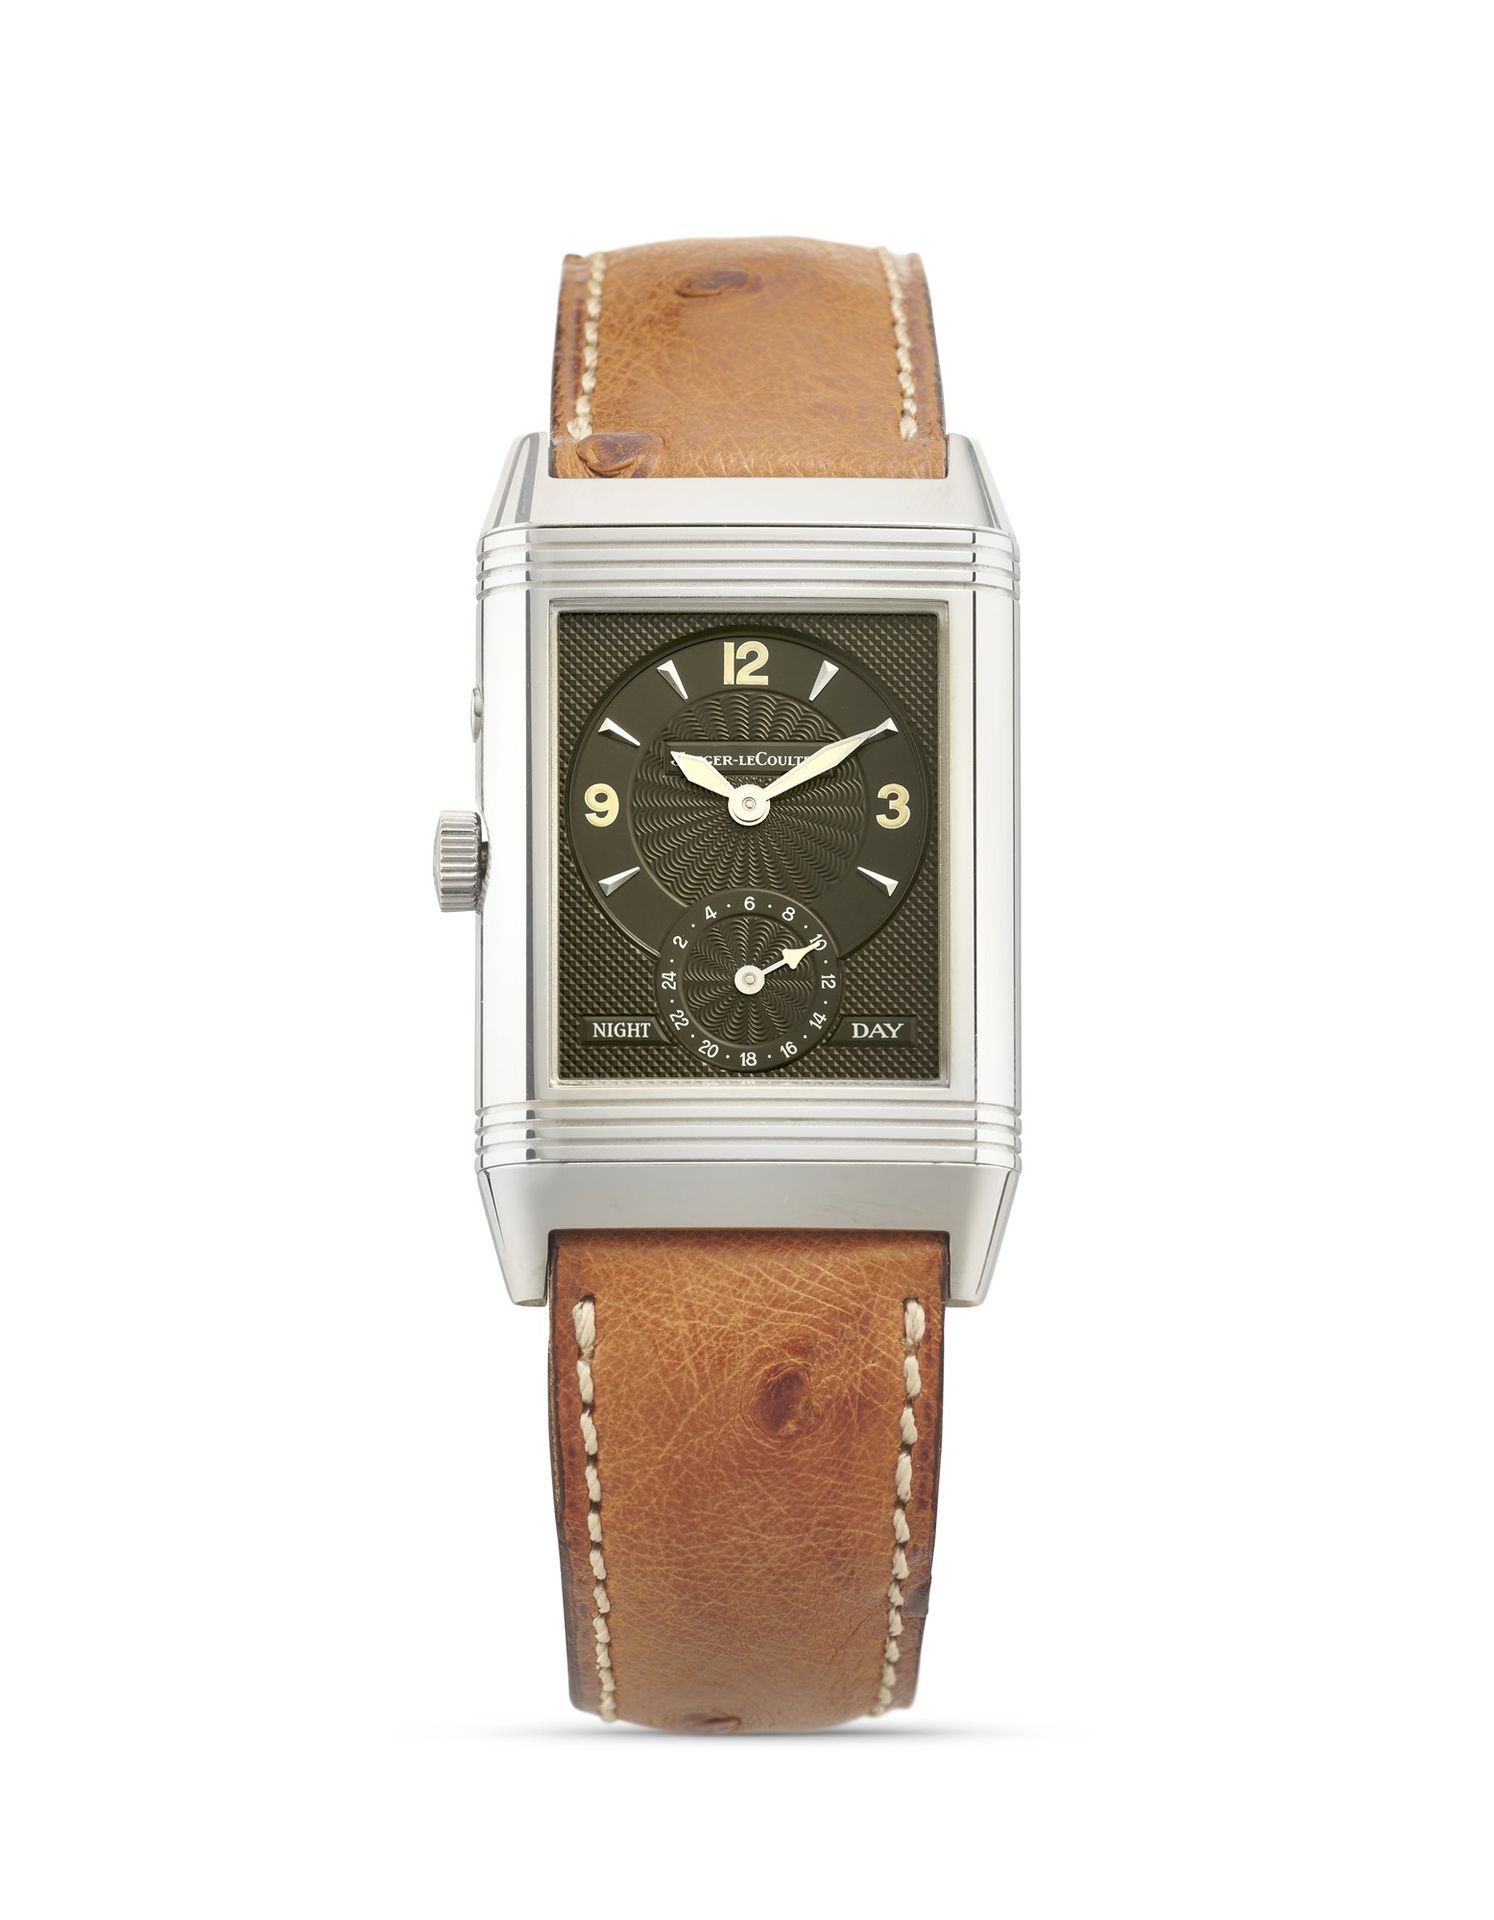 Jaeger-LeCoultre Jaeger-LeCoultre Reverso Duoface Night & Day 270854, anni '90

&hellip;